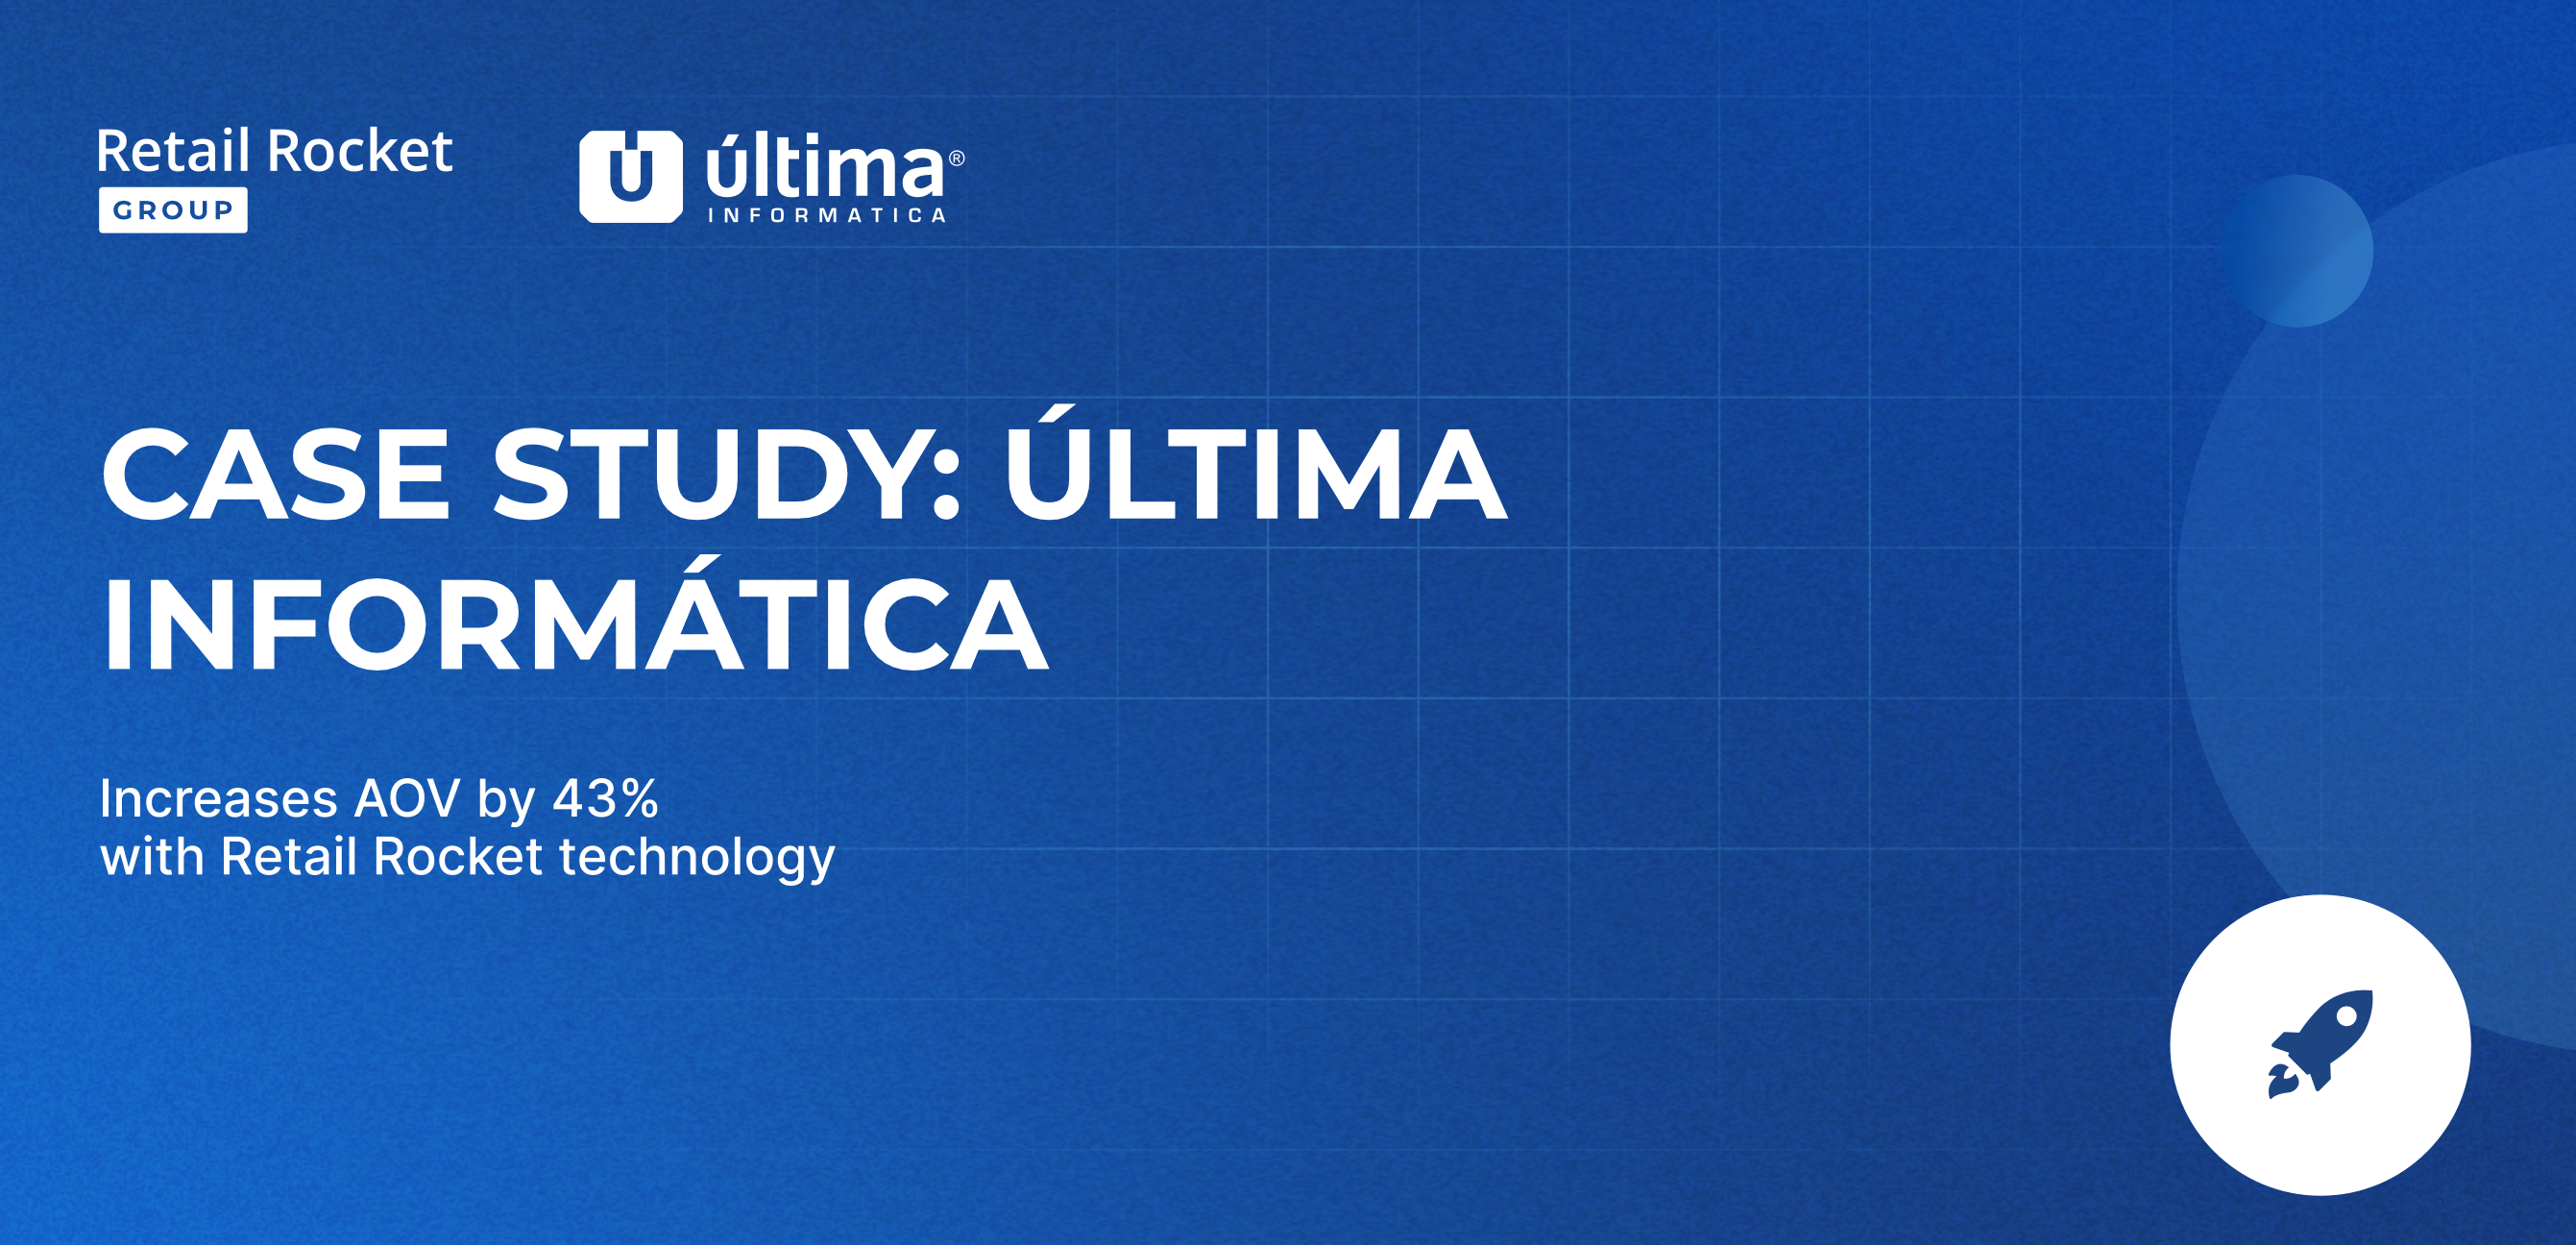 How Última Informática increases AOV by 43% with Retail Rocket Technology